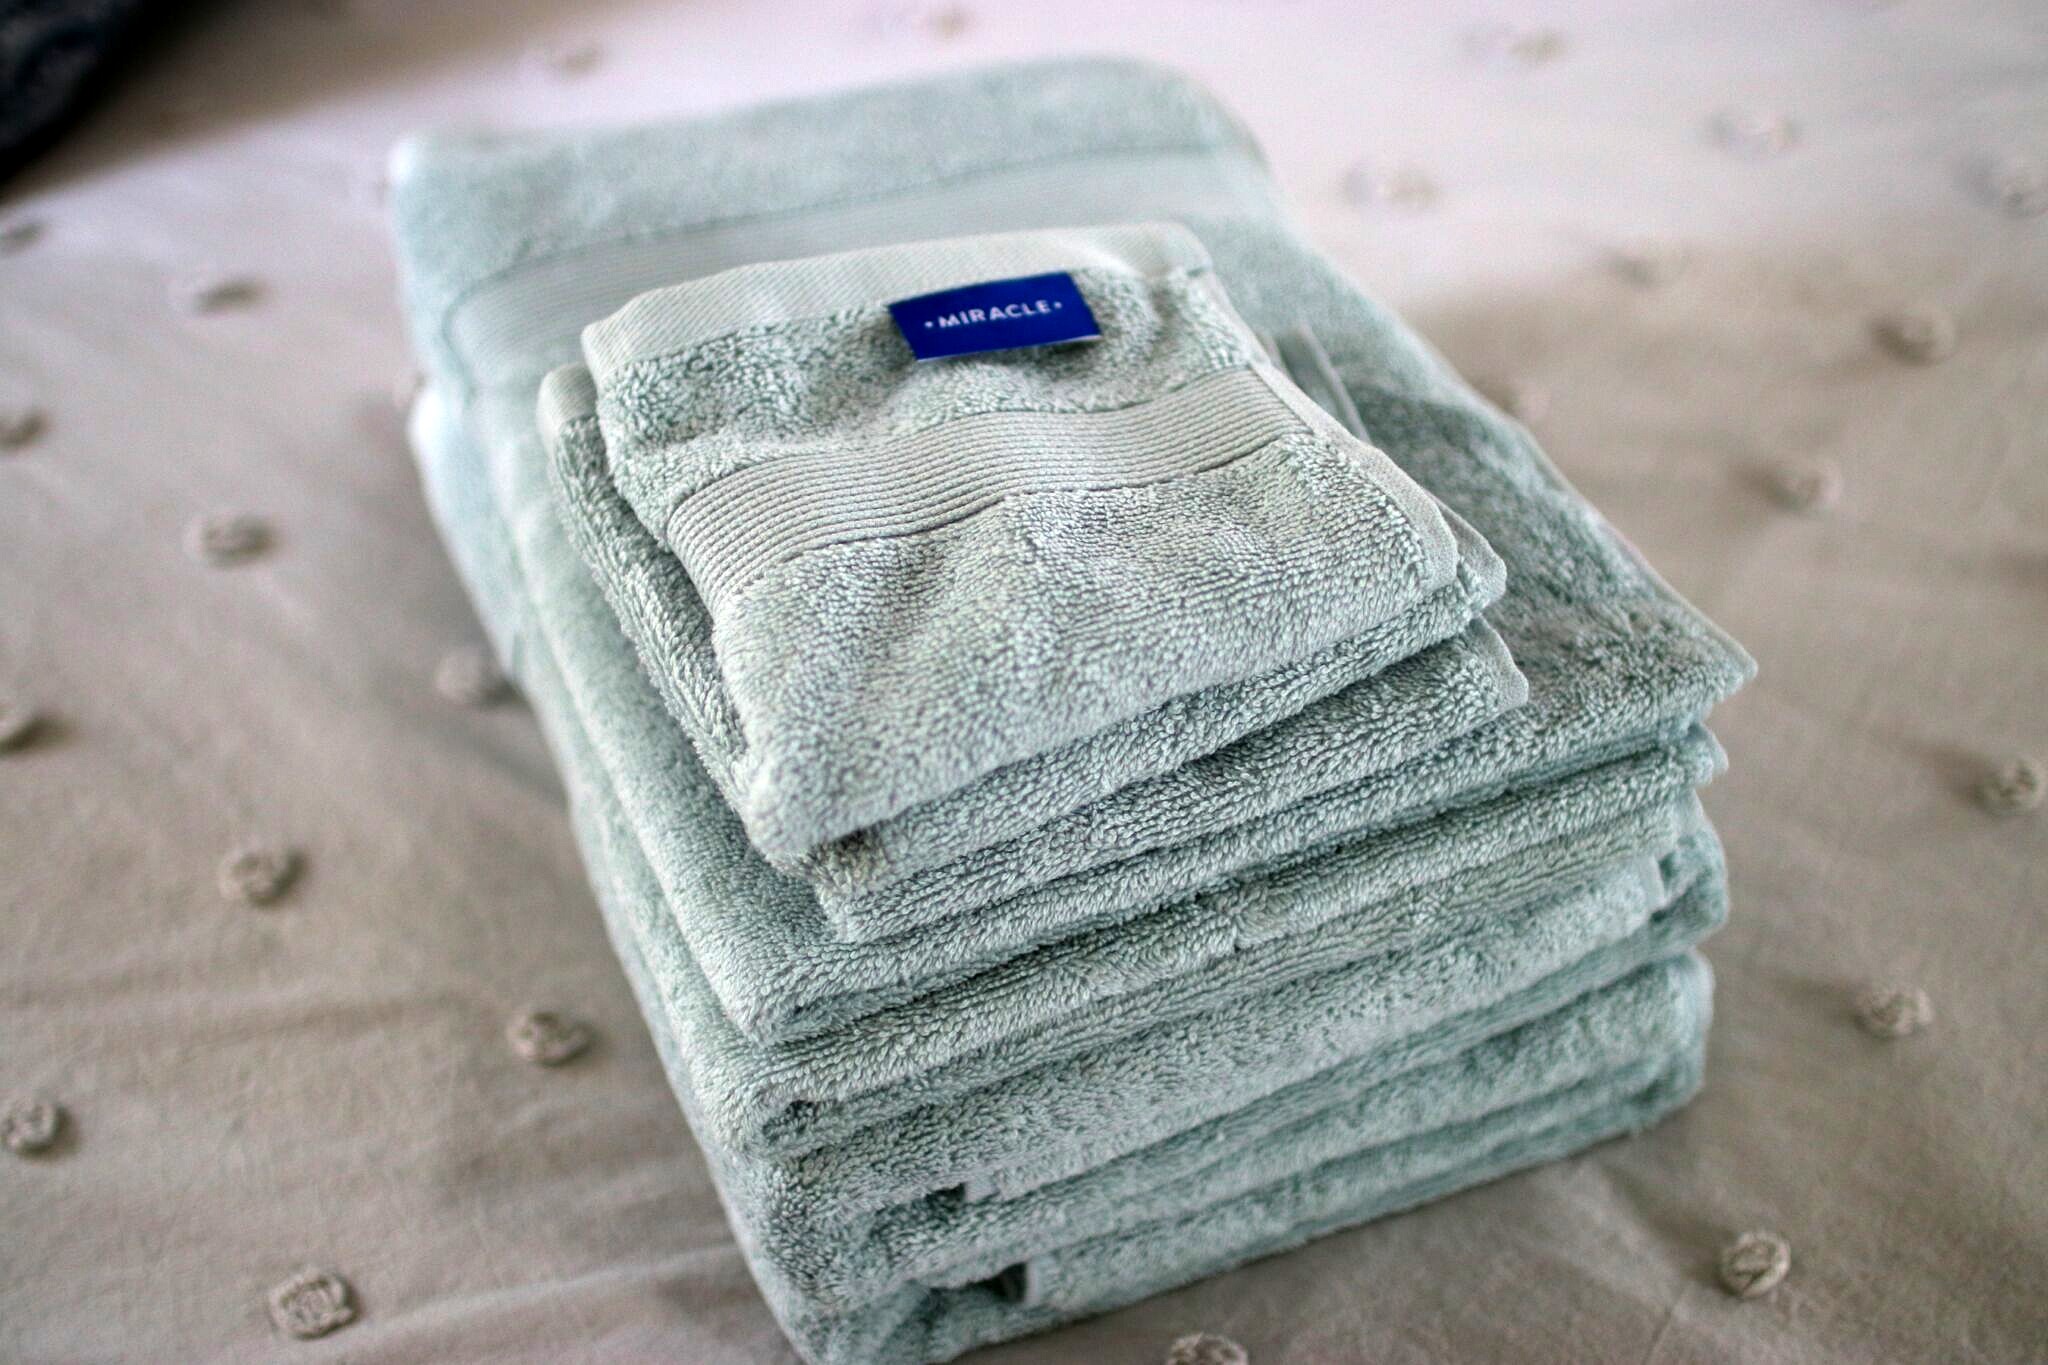 MIRACLE Brand: Towels that fight unwanted bacteria 